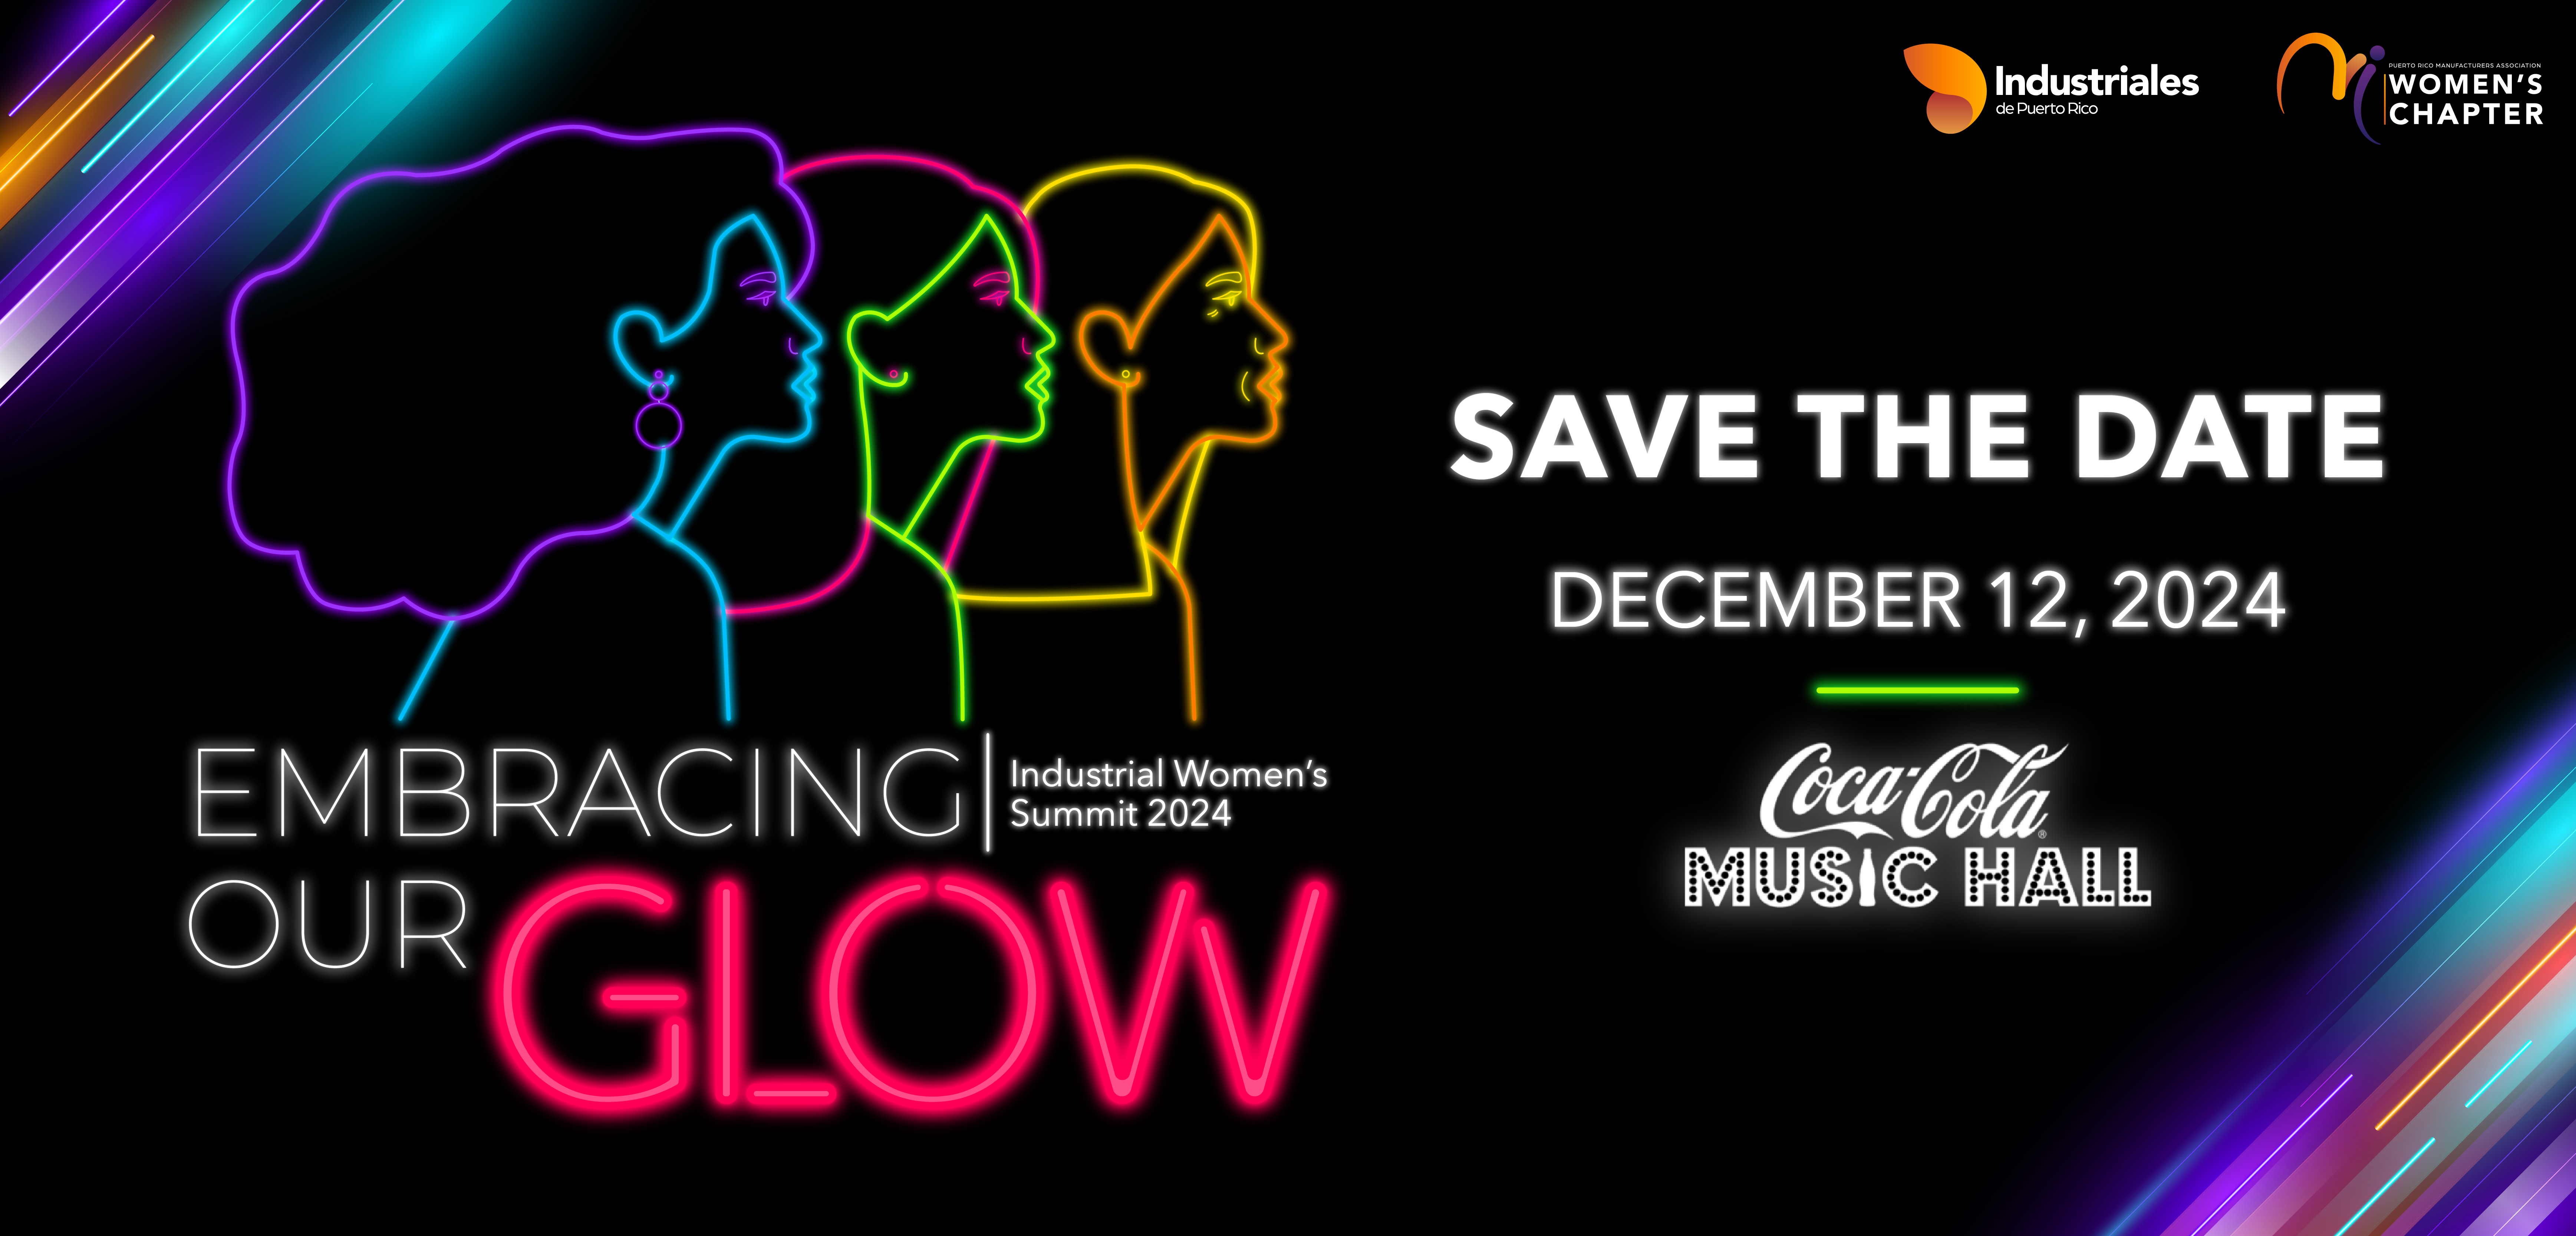 Embracing Our Glow - Industrial Women's Summit 2024